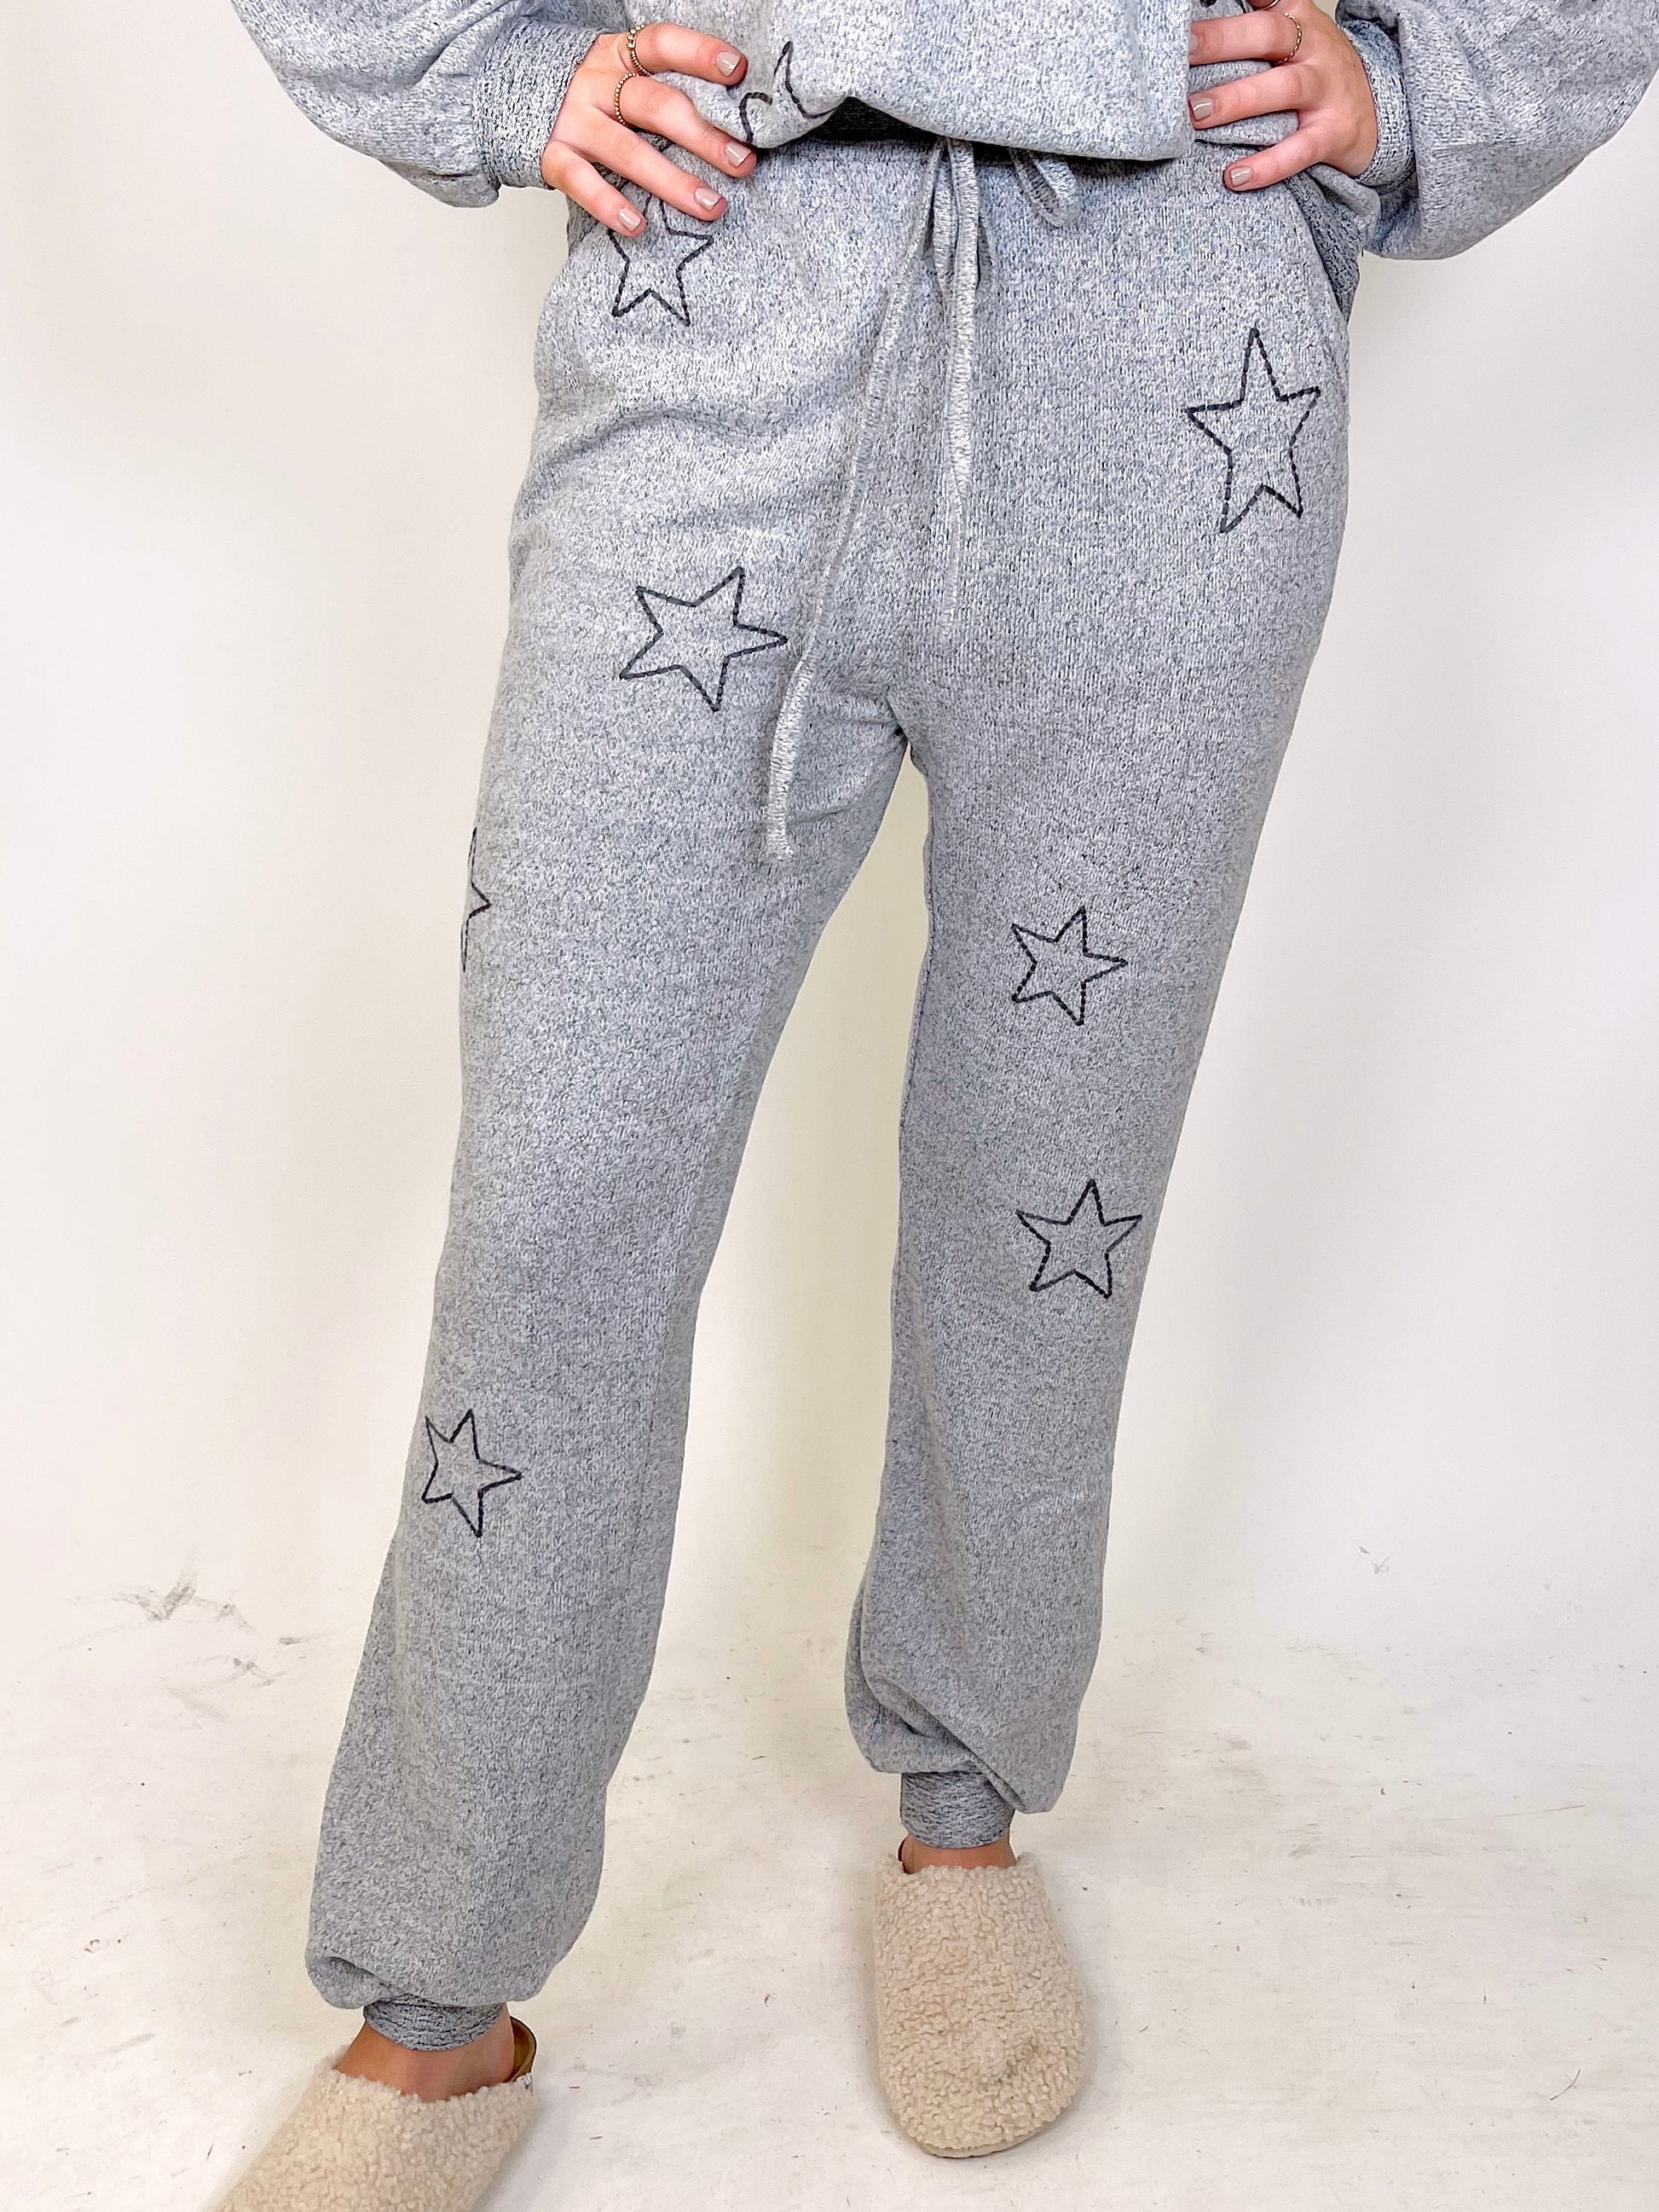 Shoot for the Stars Set | DOORBUSTER-Matching Set-Kori-The Village Shoppe, Women’s Fashion Boutique, Shop Online and In Store - Located in Muscle Shoals, AL.